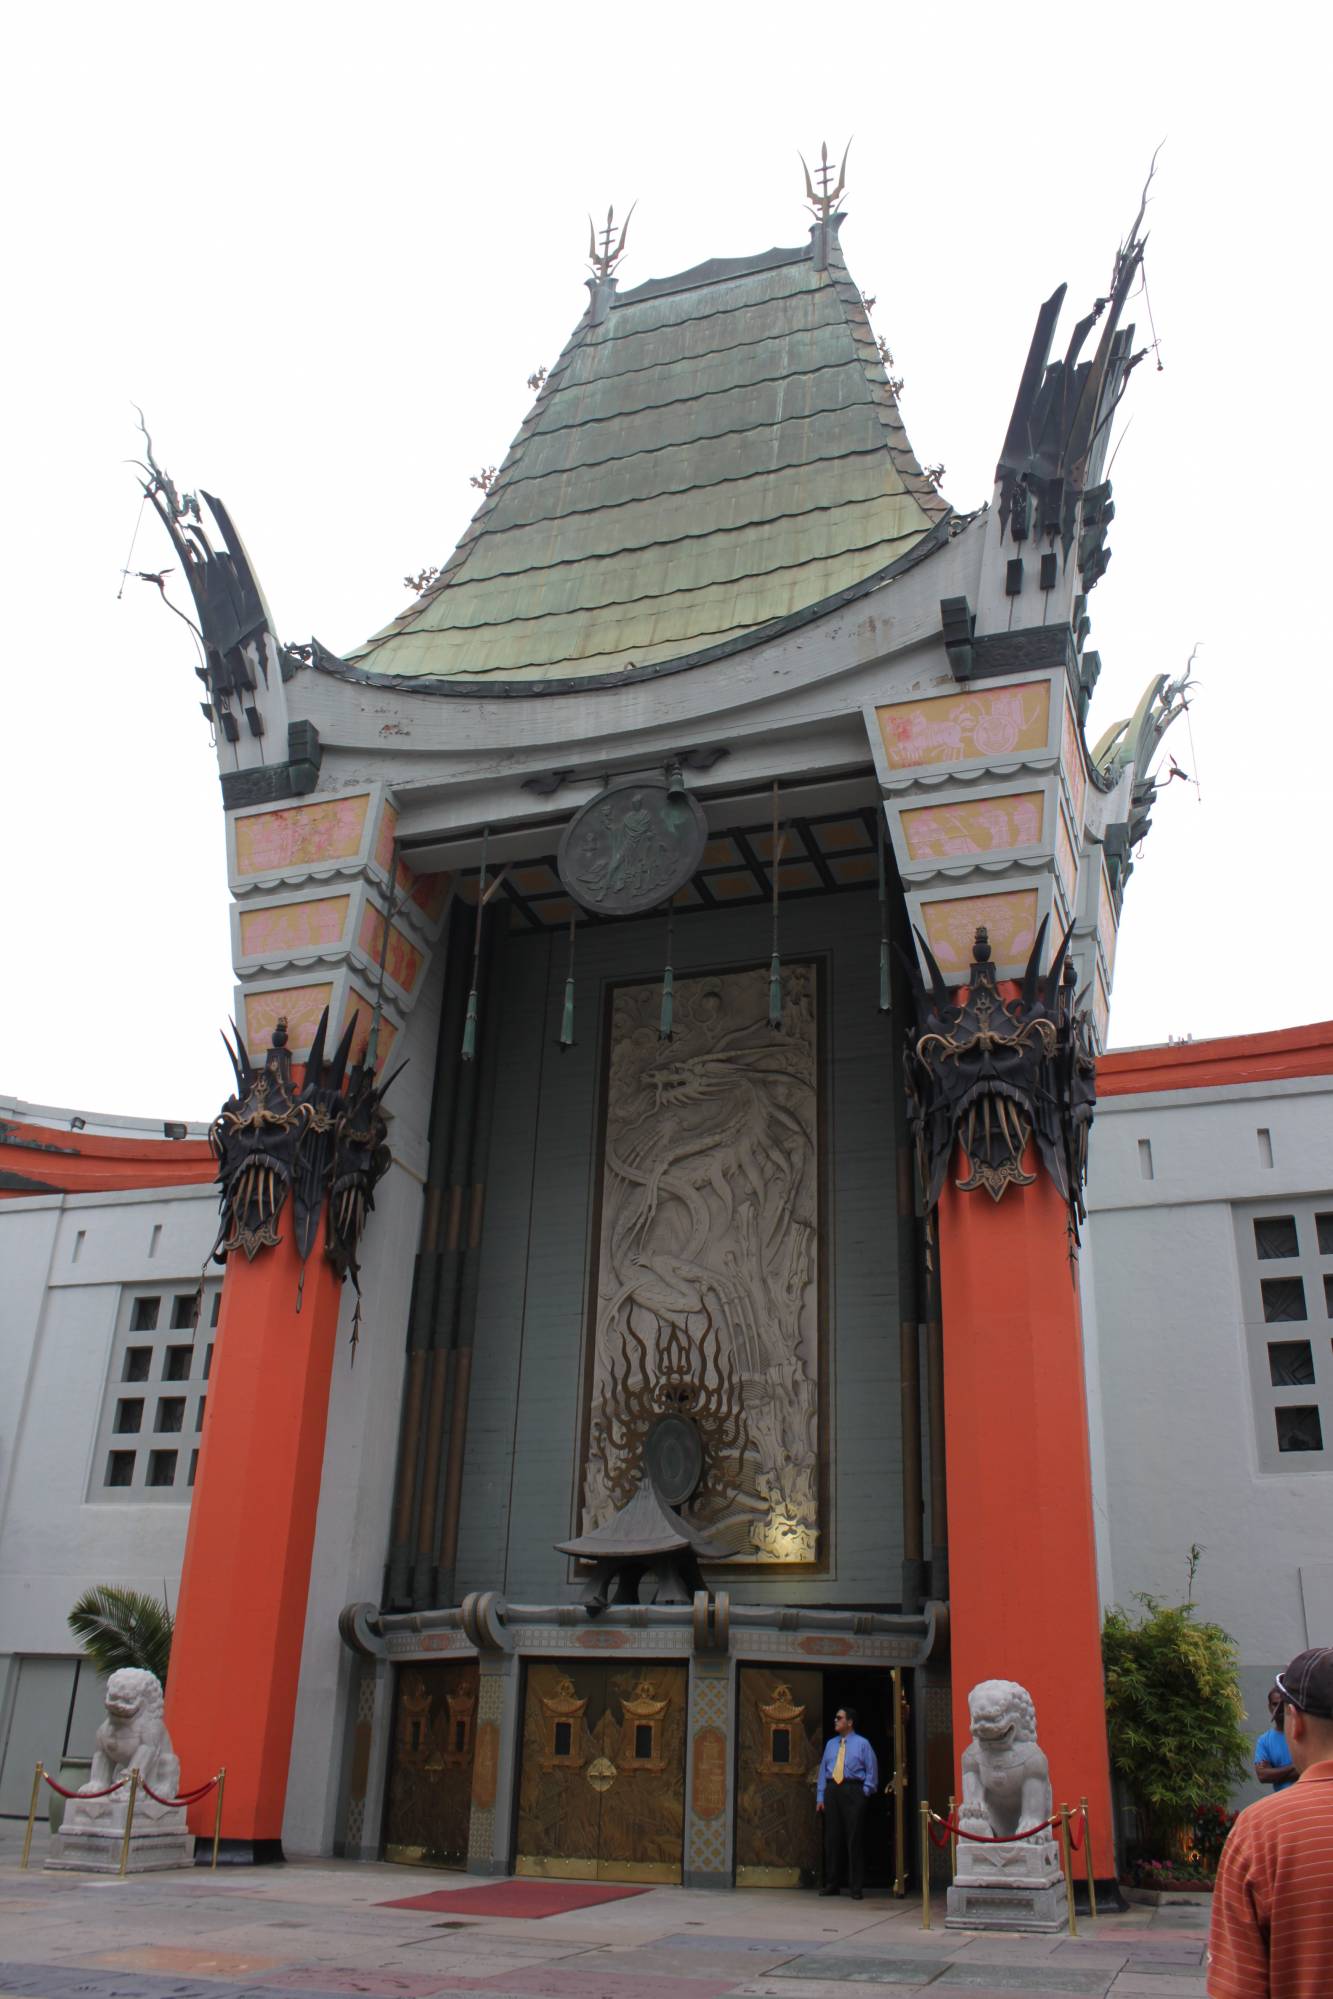 Grauman's Chinese Theater - Hollywood